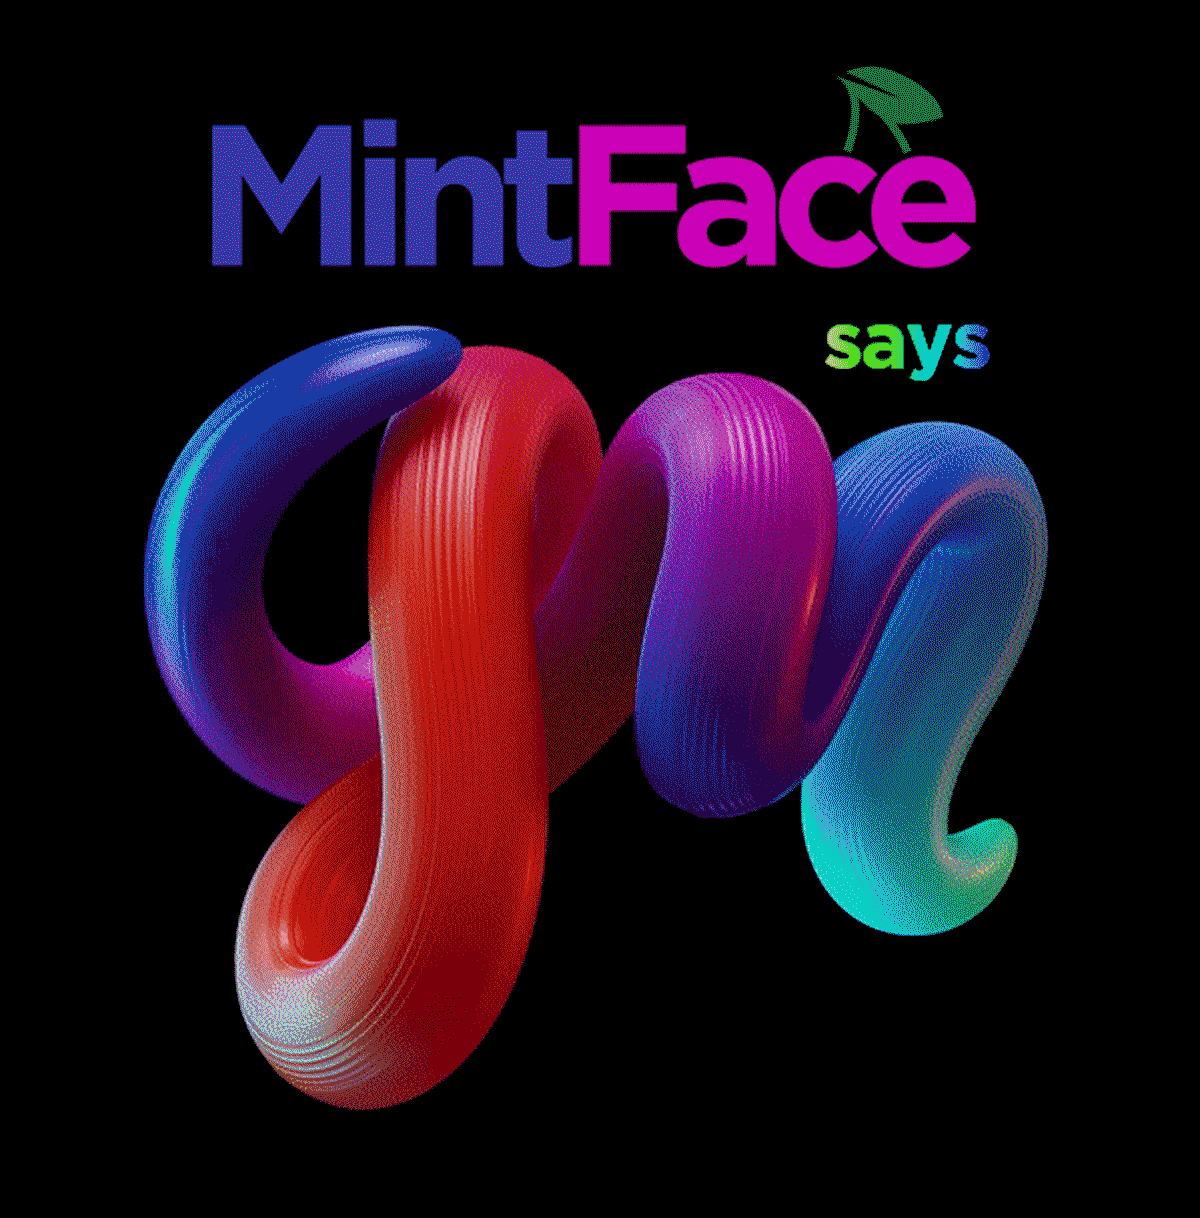 MintFace says